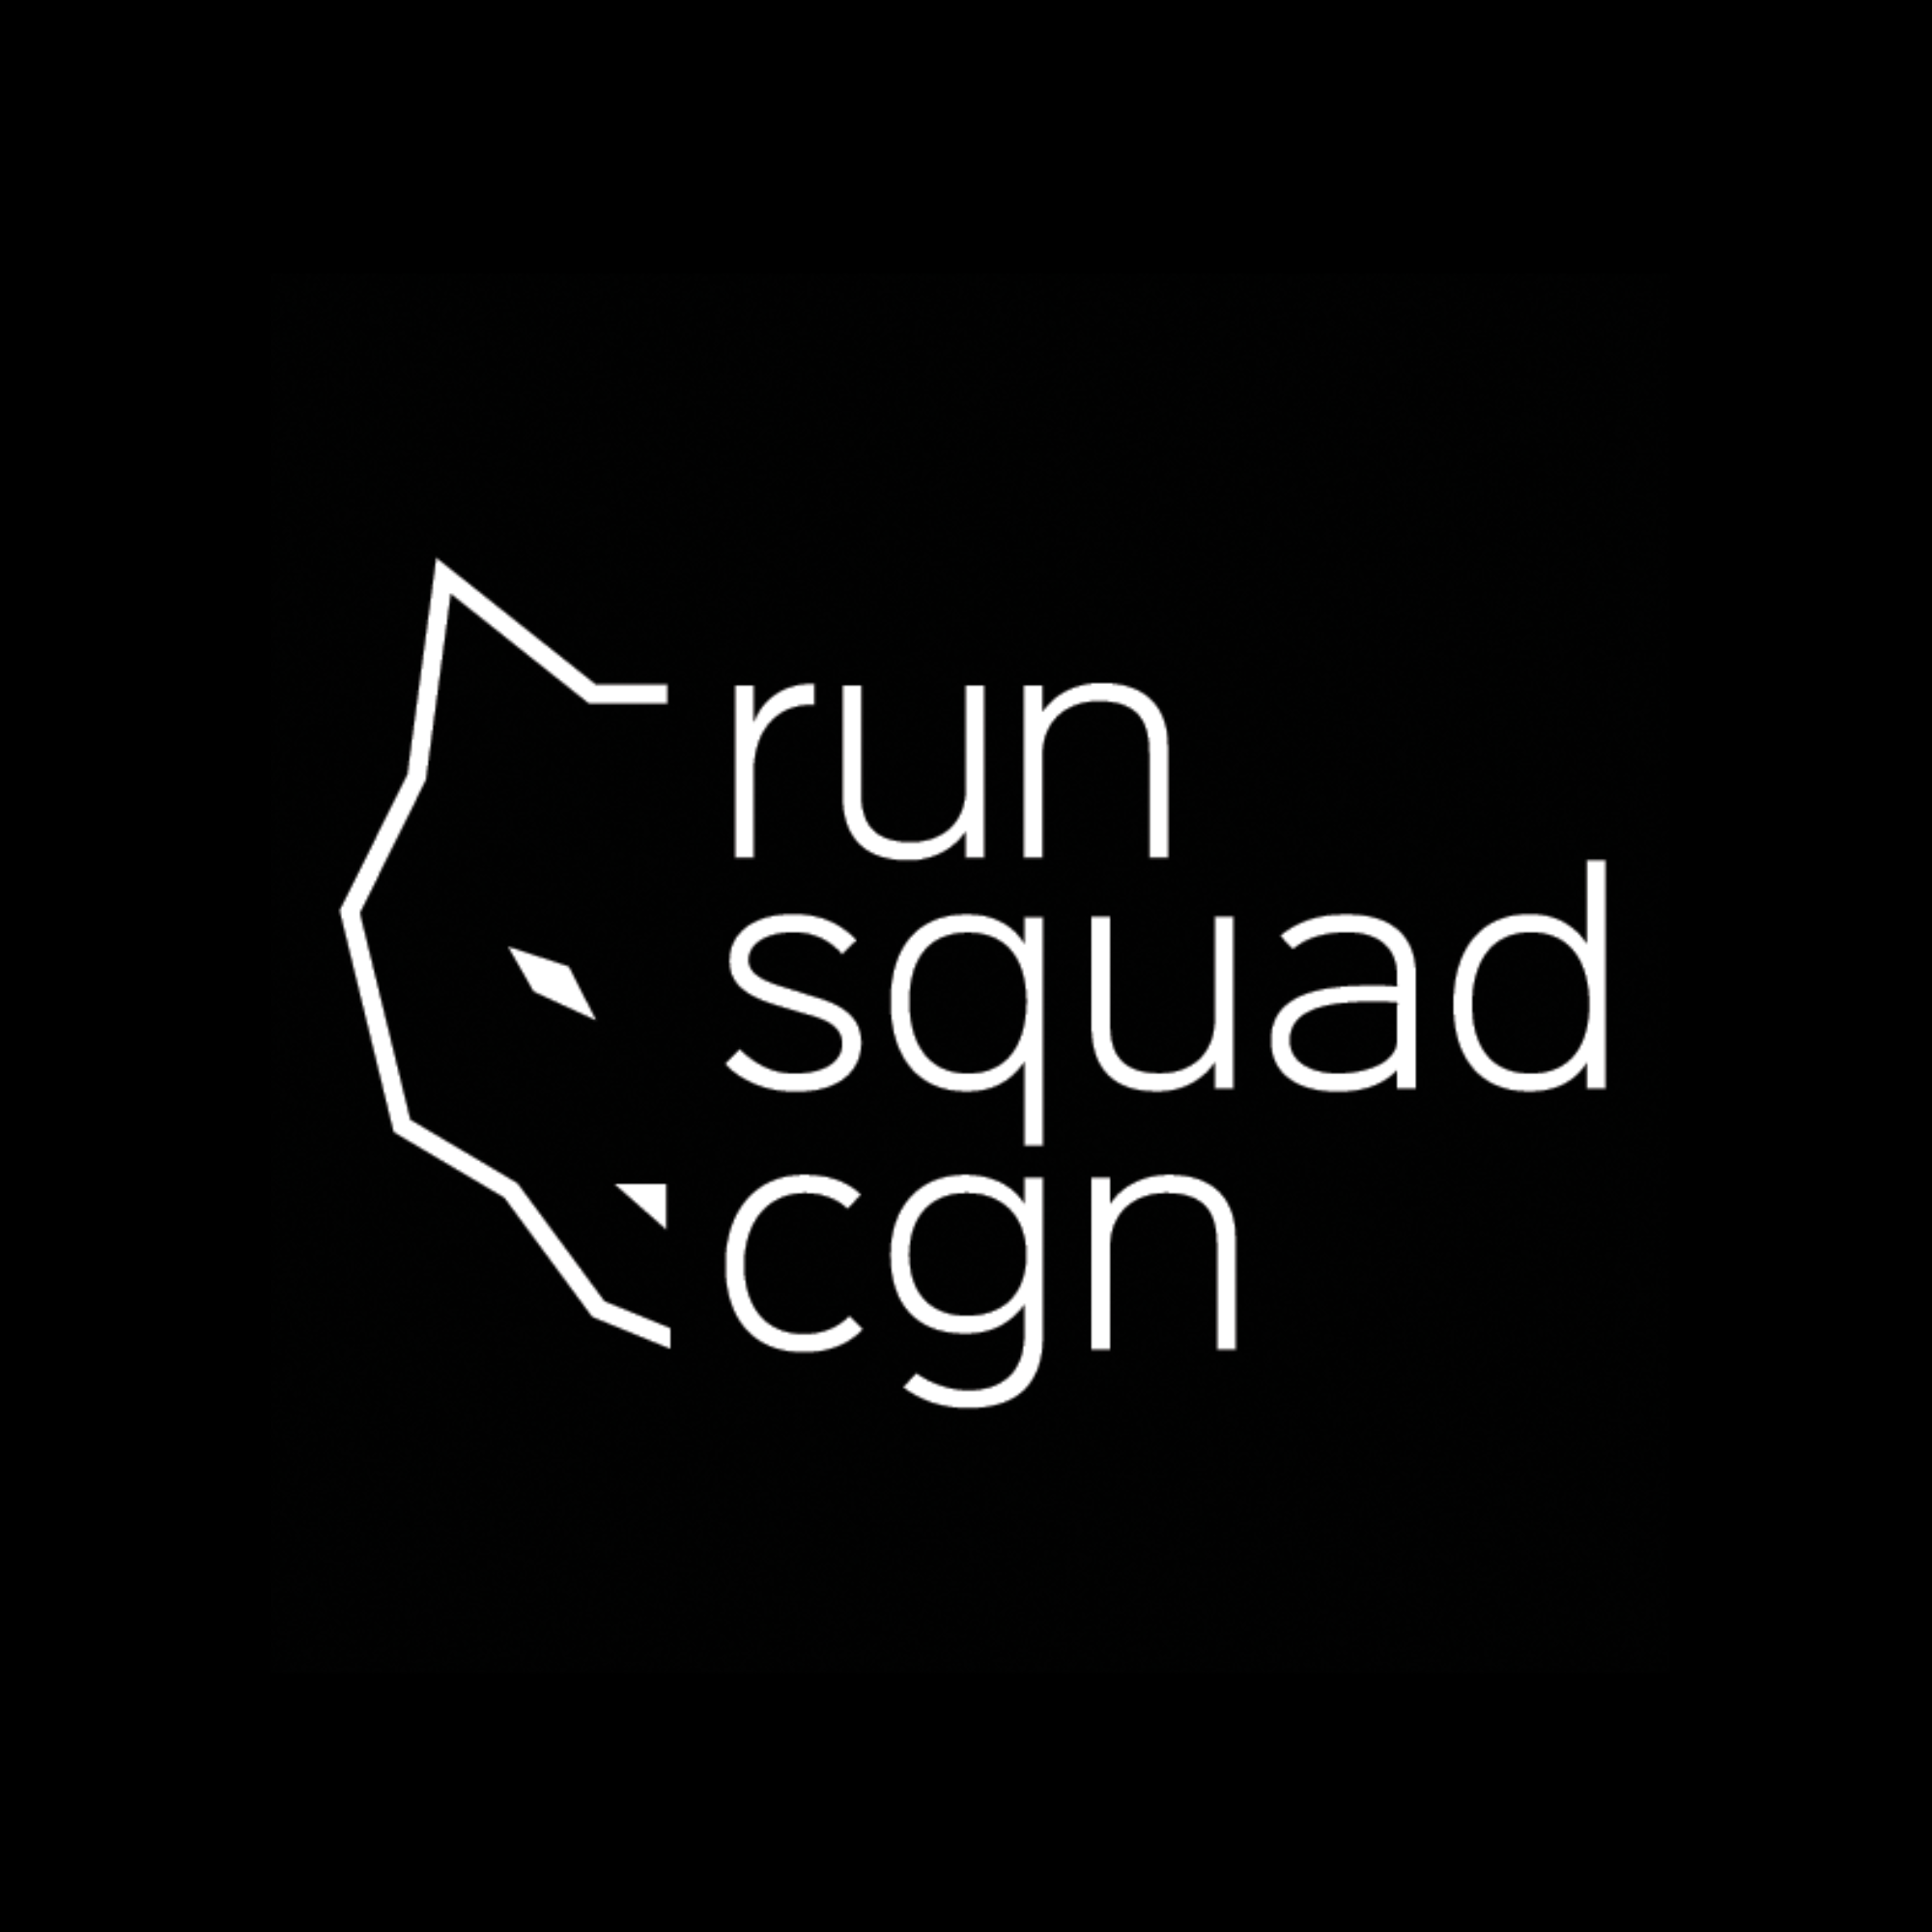 Run Squad CGN - Train hard, play hard, support each other.